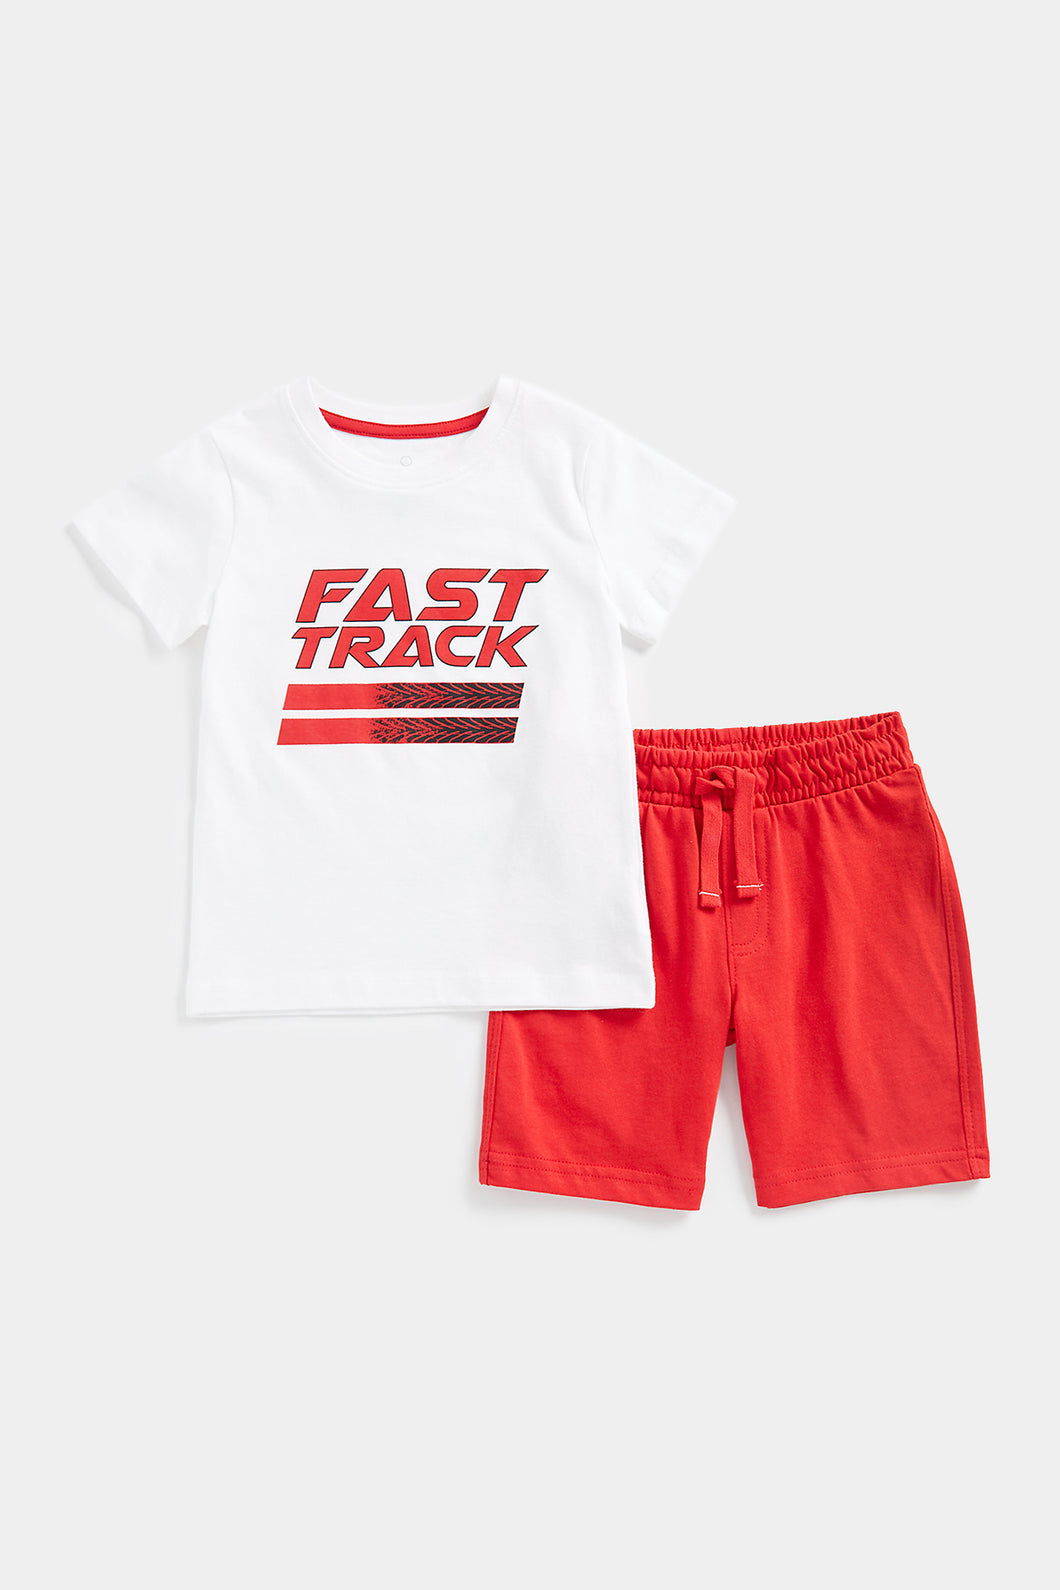 Mothercare Fast Track T-Shirt and Shorts Set